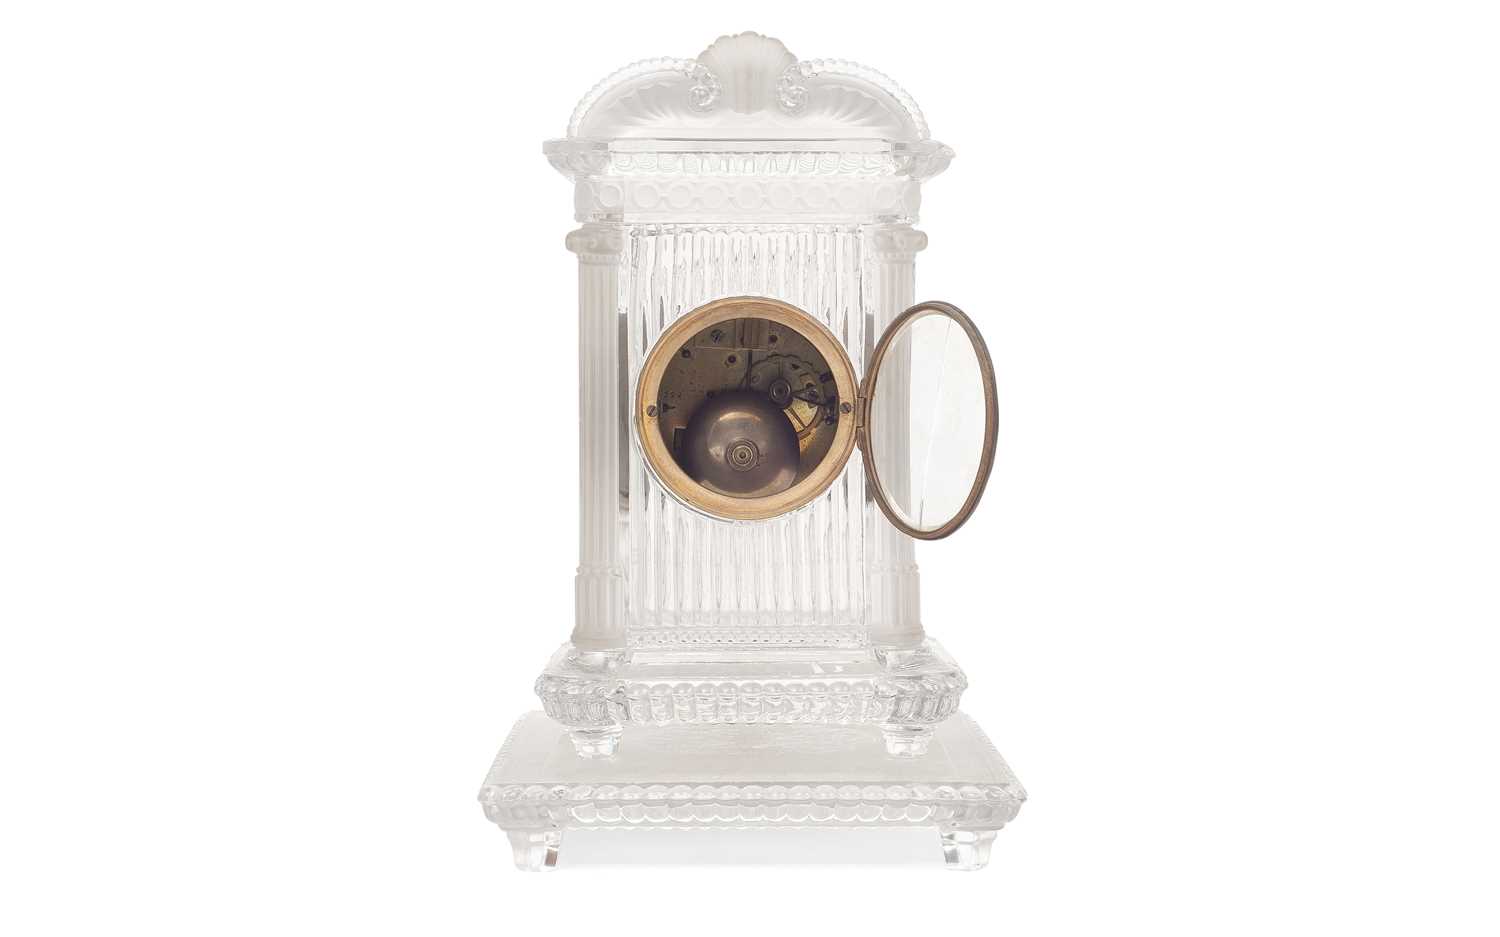 BACCARAT: A LATE 19TH CENTURY FROSTED AND CLEAR GLASS MANTEL CLOCK - Image 2 of 3